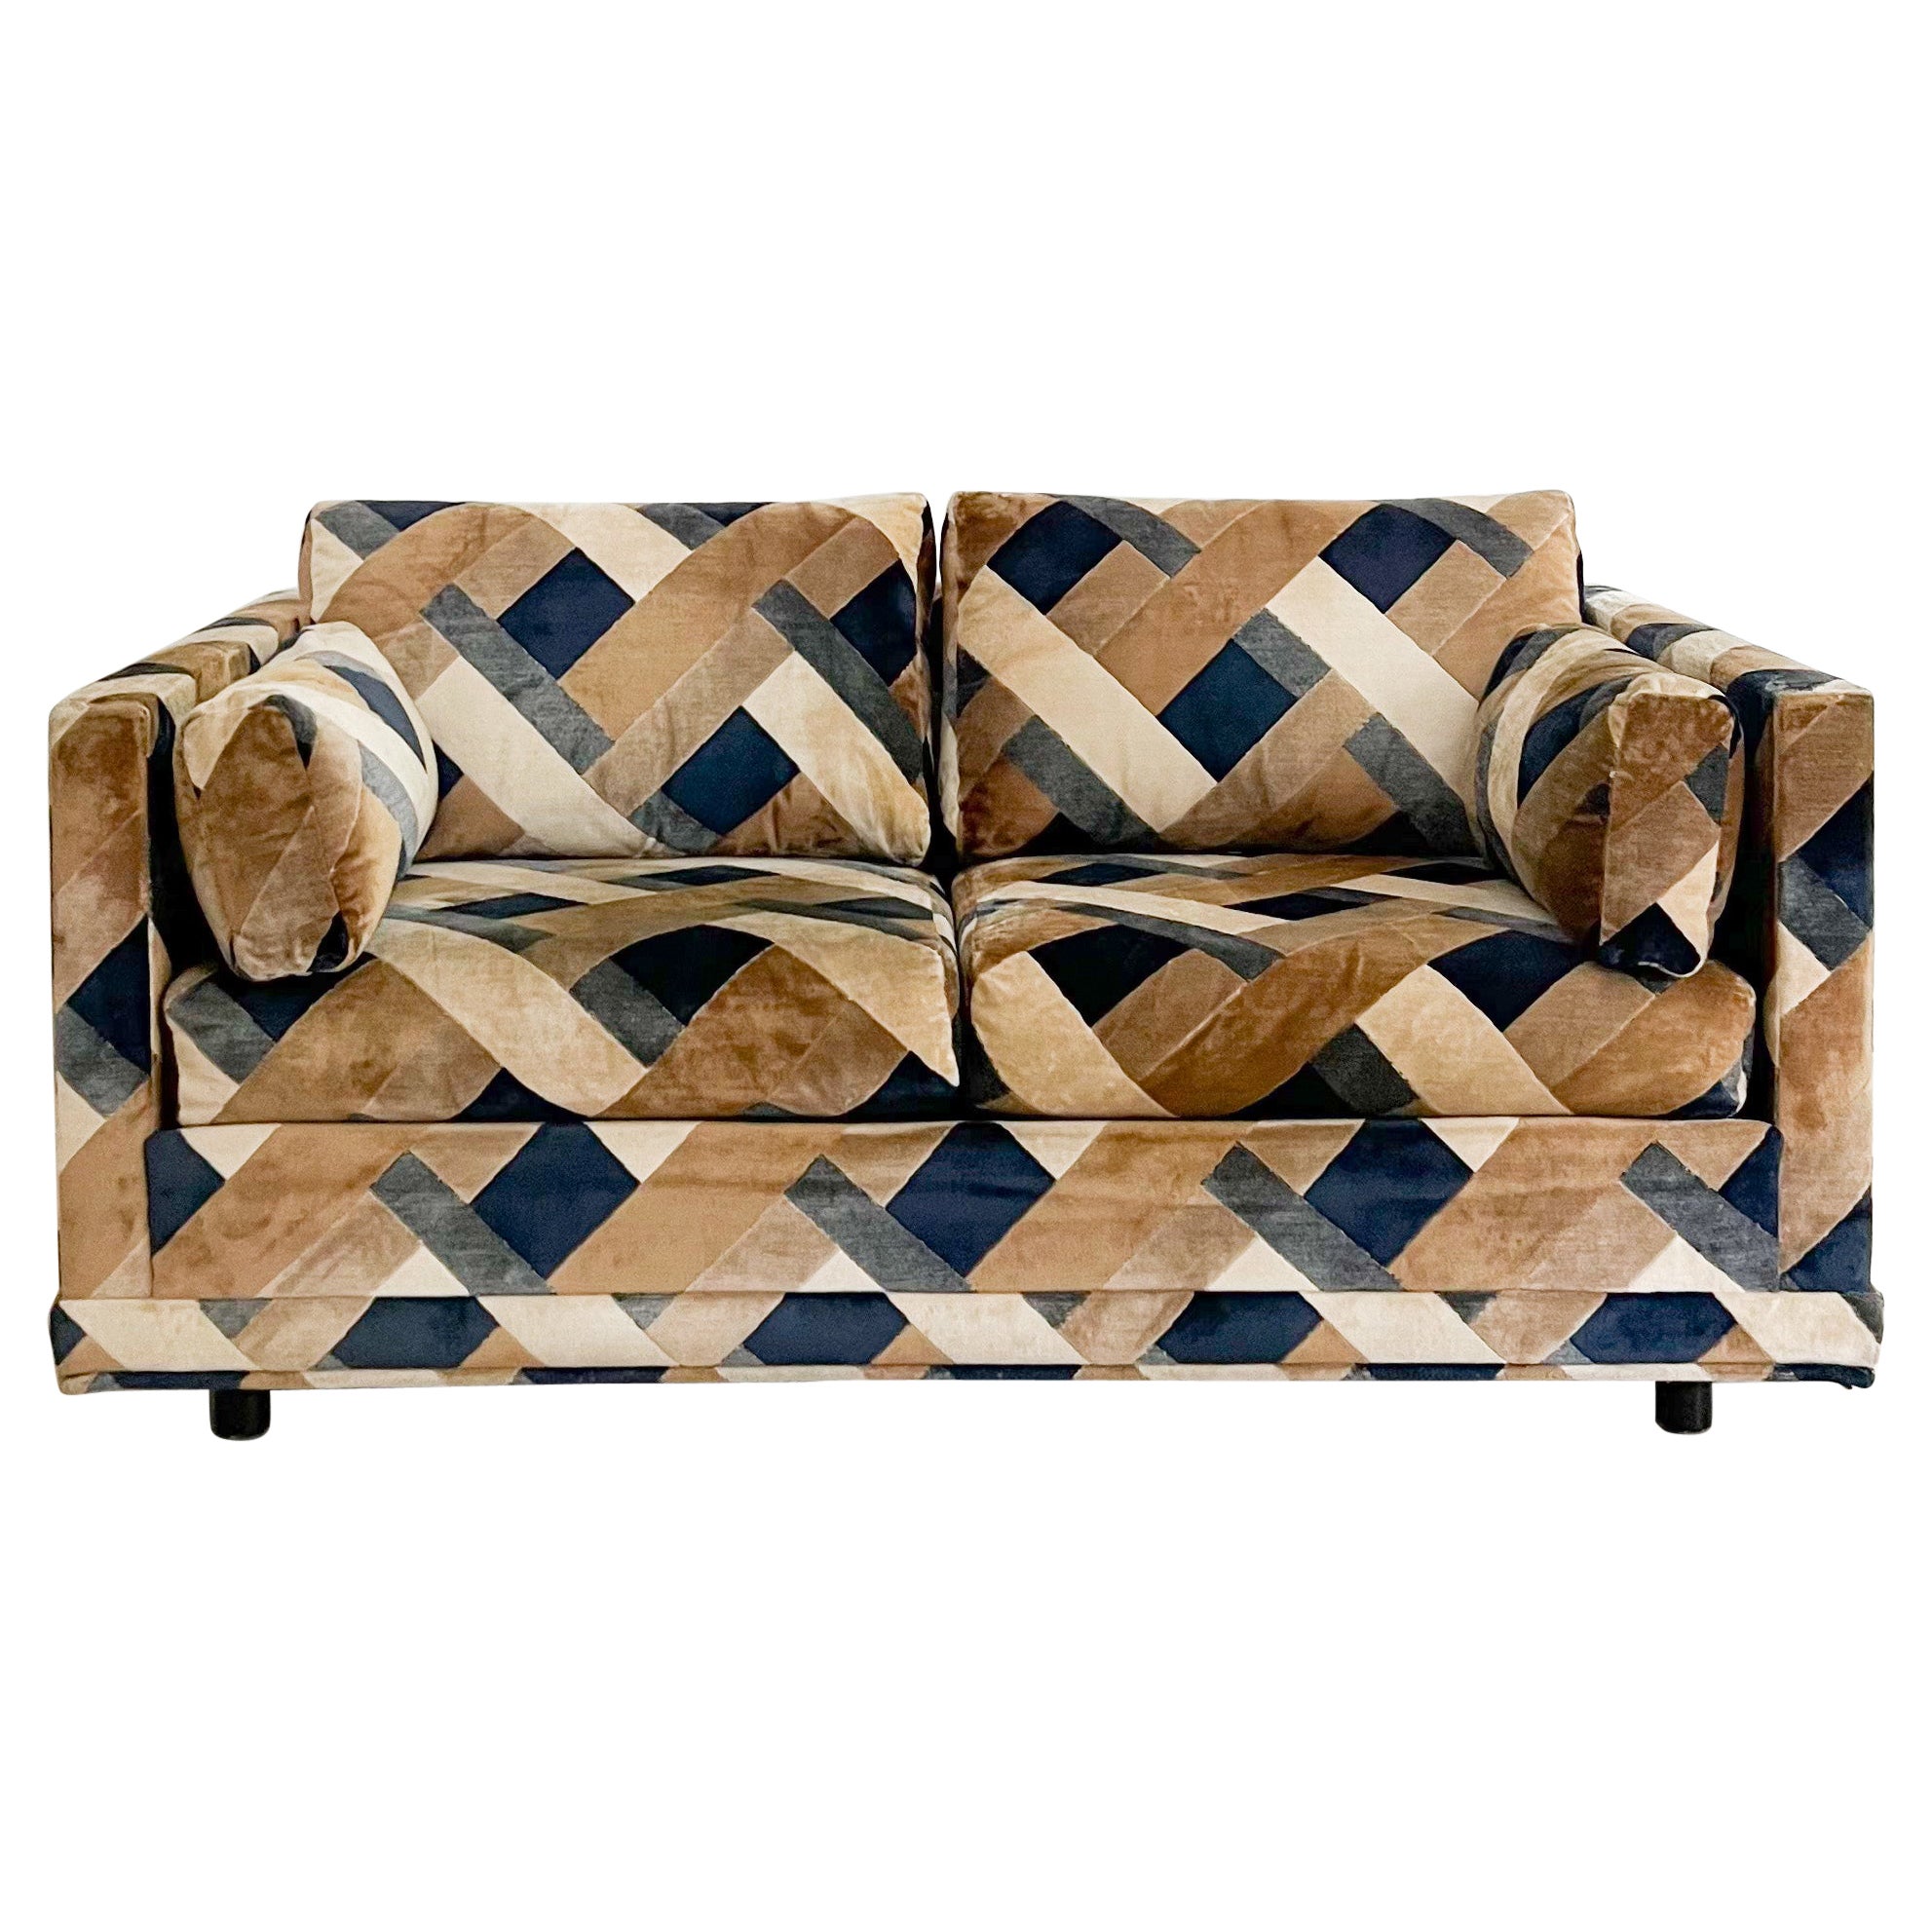 Mid-Century Modern Sofa / Loveseat by Adrian Pearsall for Comfort